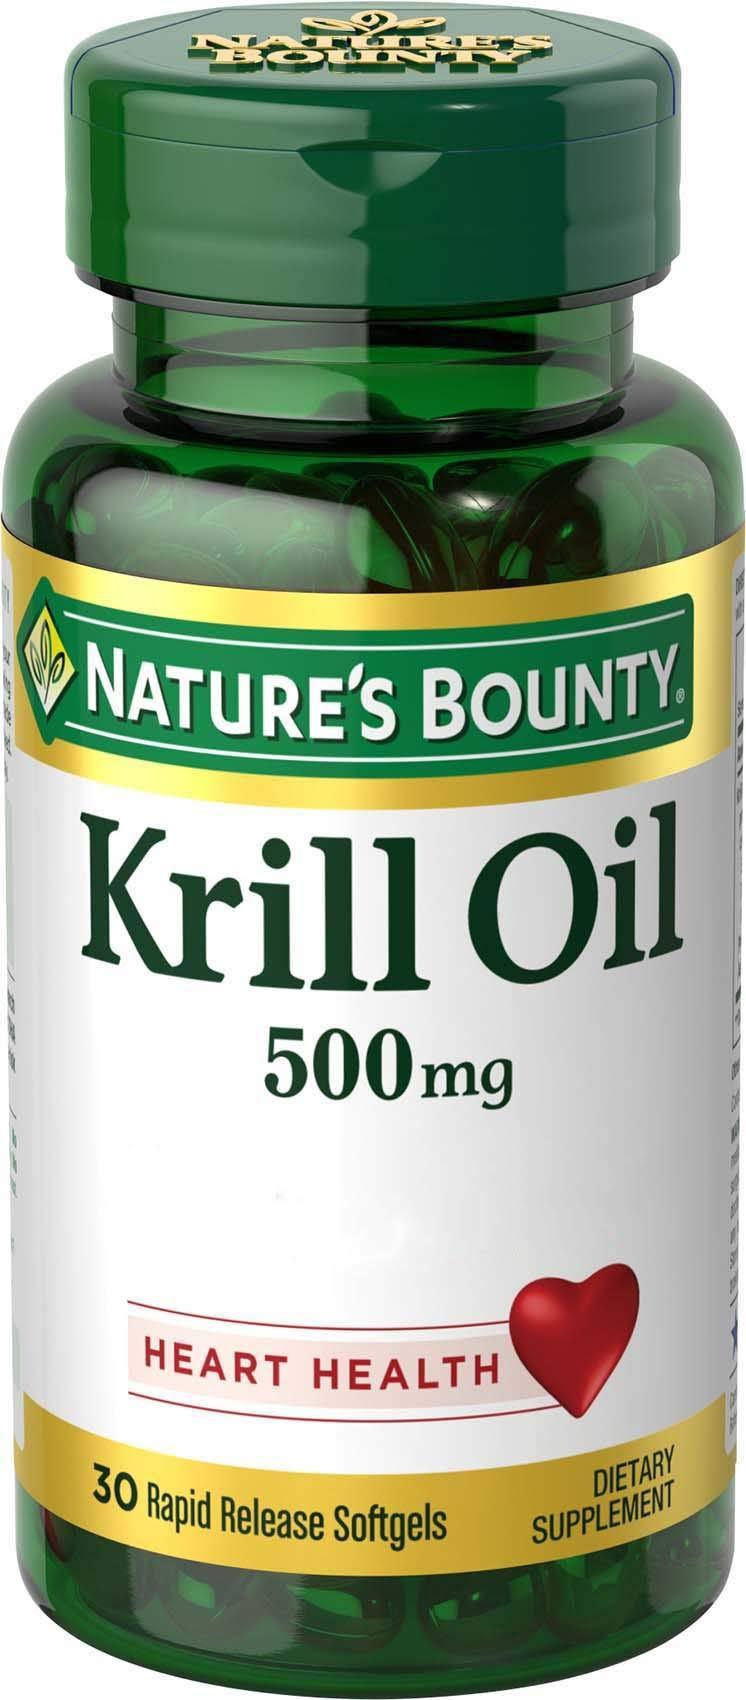 Nature's Bounty Red Krill Oil - 500mg, x30